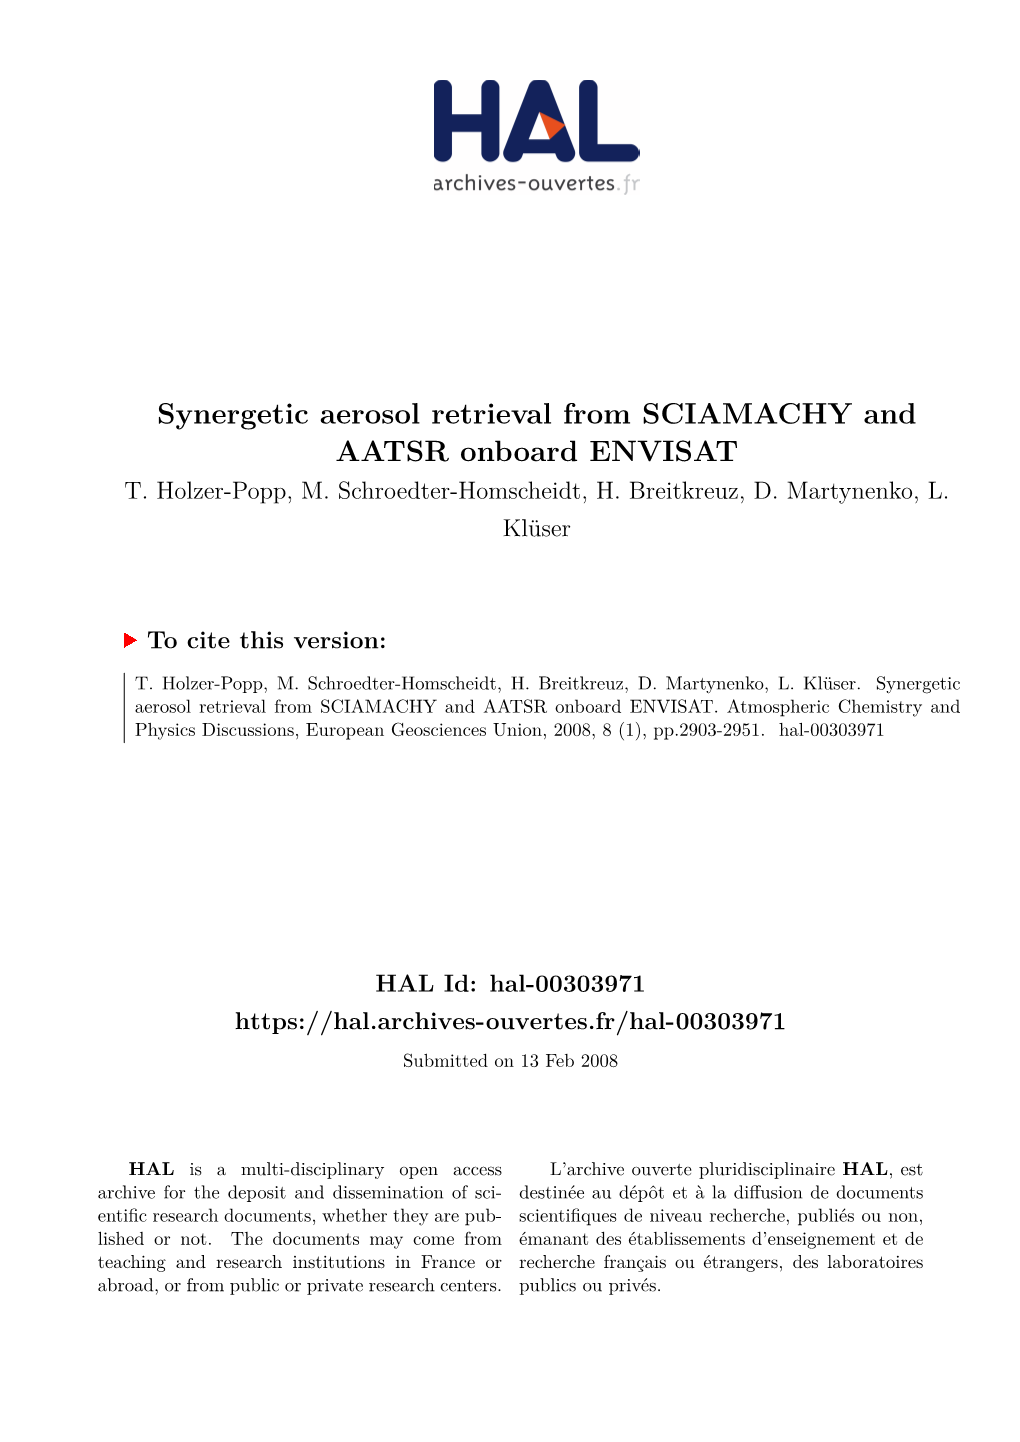 Synergetic Aerosol Retrieval from SCIAMACHY and AATSR Onboard ENVISAT T